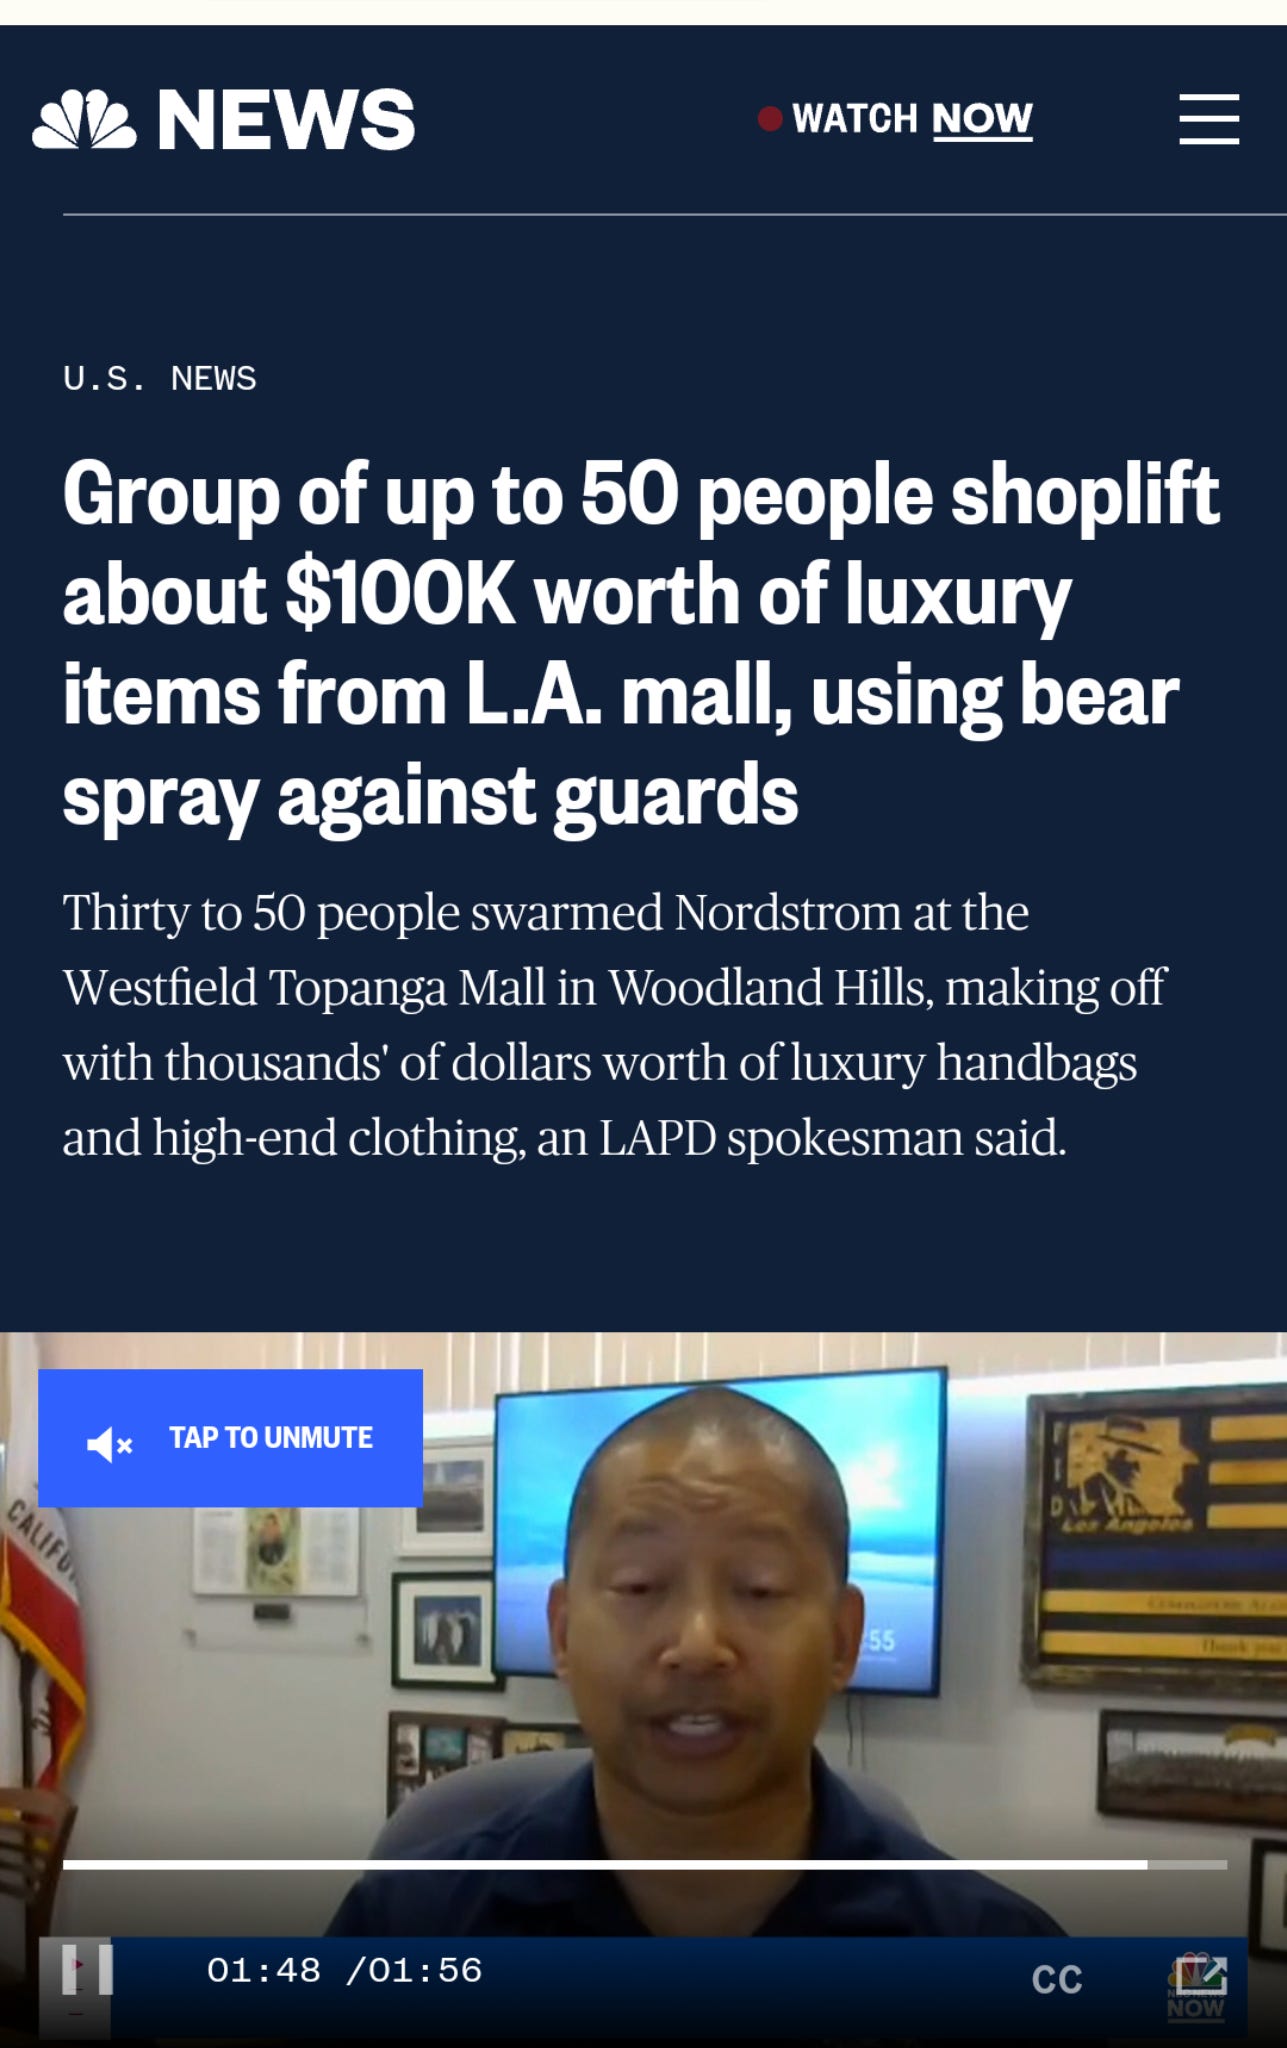 Group of up to 50 people shoplift about $100K worth of luxury items from  L.A. mall, using bear spray against guards